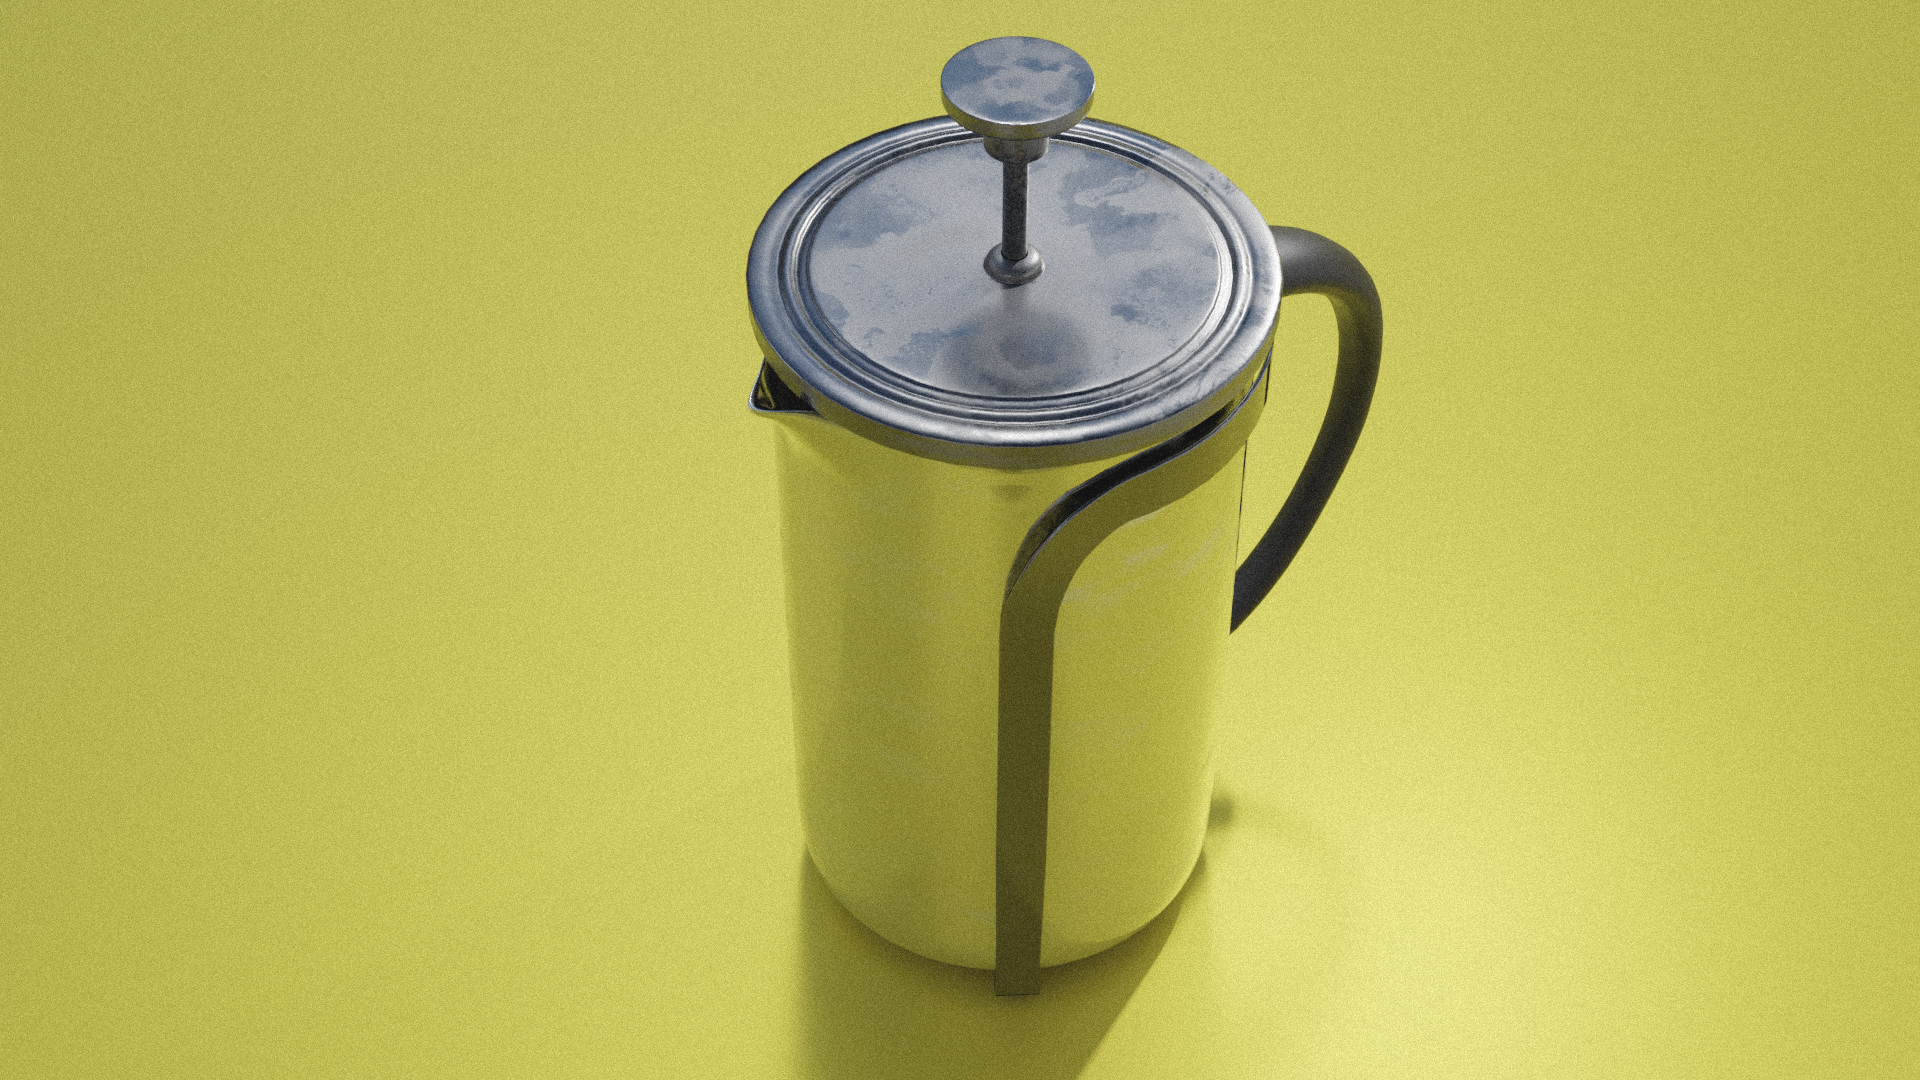 French Coffee Press - Kitchen Asset by Davilion preview image 4